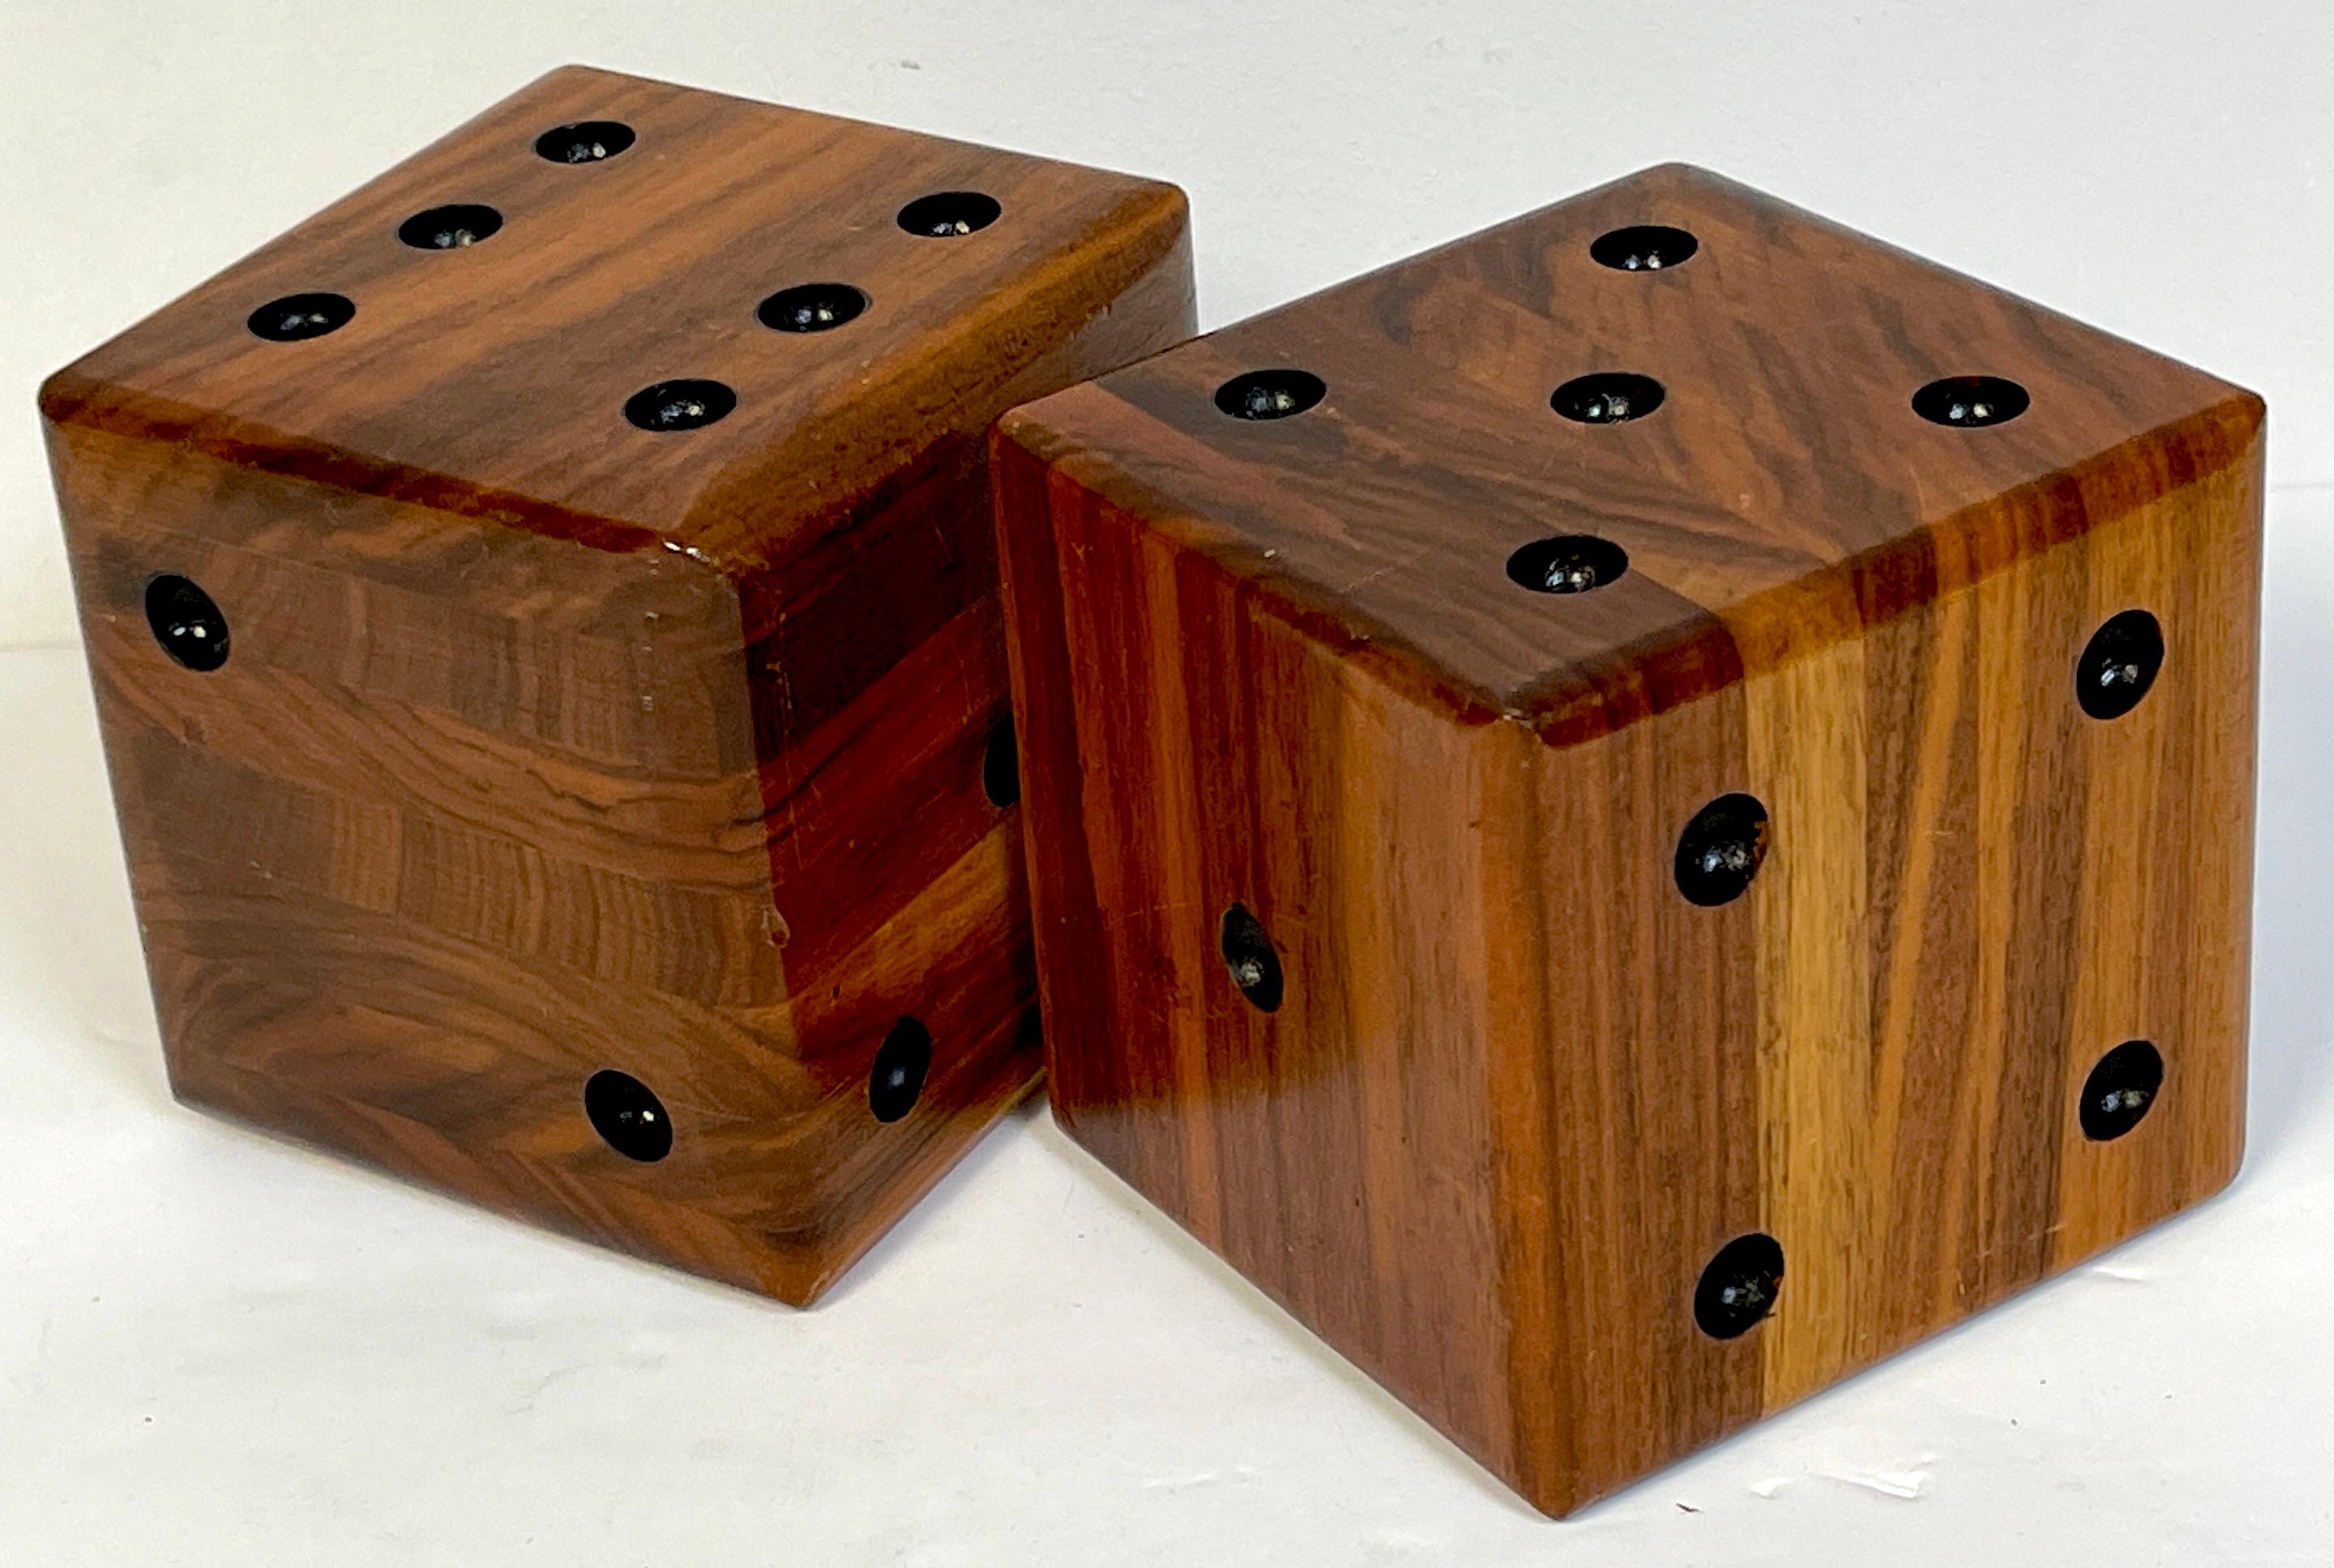 Pair of oversized Macassar ebony carved Casino Dice, France, Circa 1950s

Each one a hefty example made of seven sections book-matched Macassar Ebony wood, with carved /incised ebonized pips representing the numbers on the dice.

Believed to be